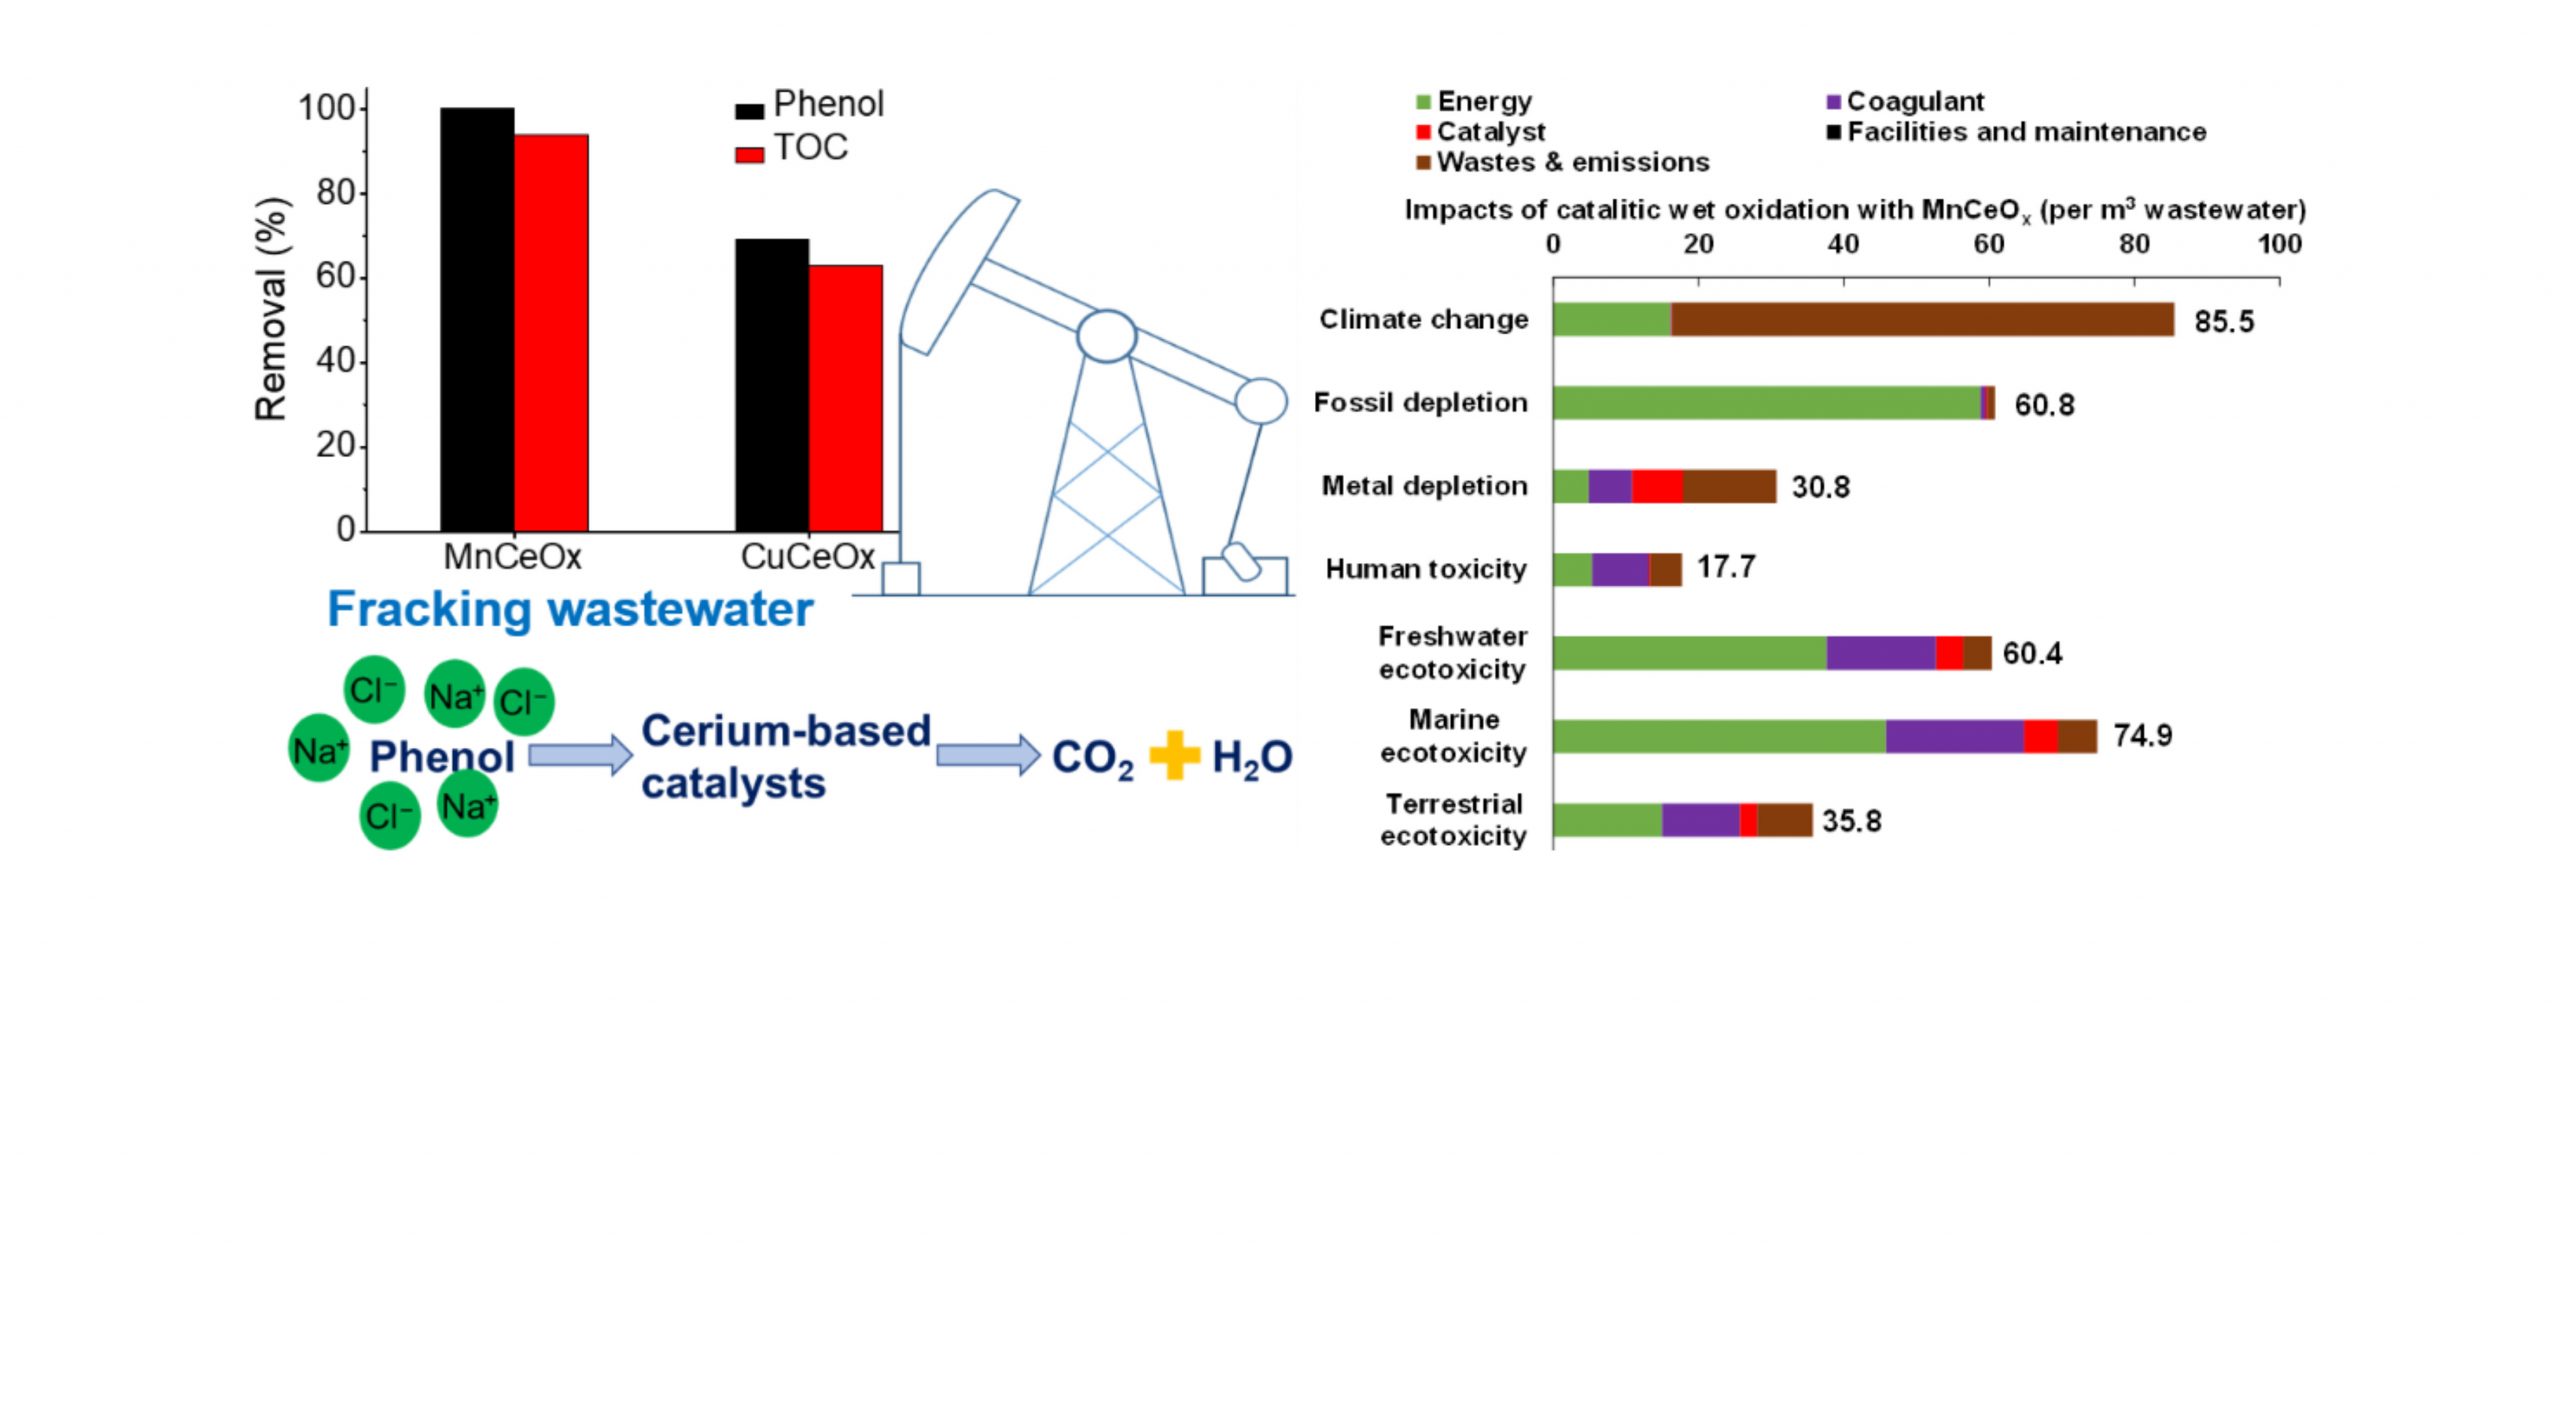 Fracking wastewater treatment: Catalytic performance and life cycle environmental impacts of cerium-based mixed oxide catalysts for catalytic wet oxidation of organic compounds